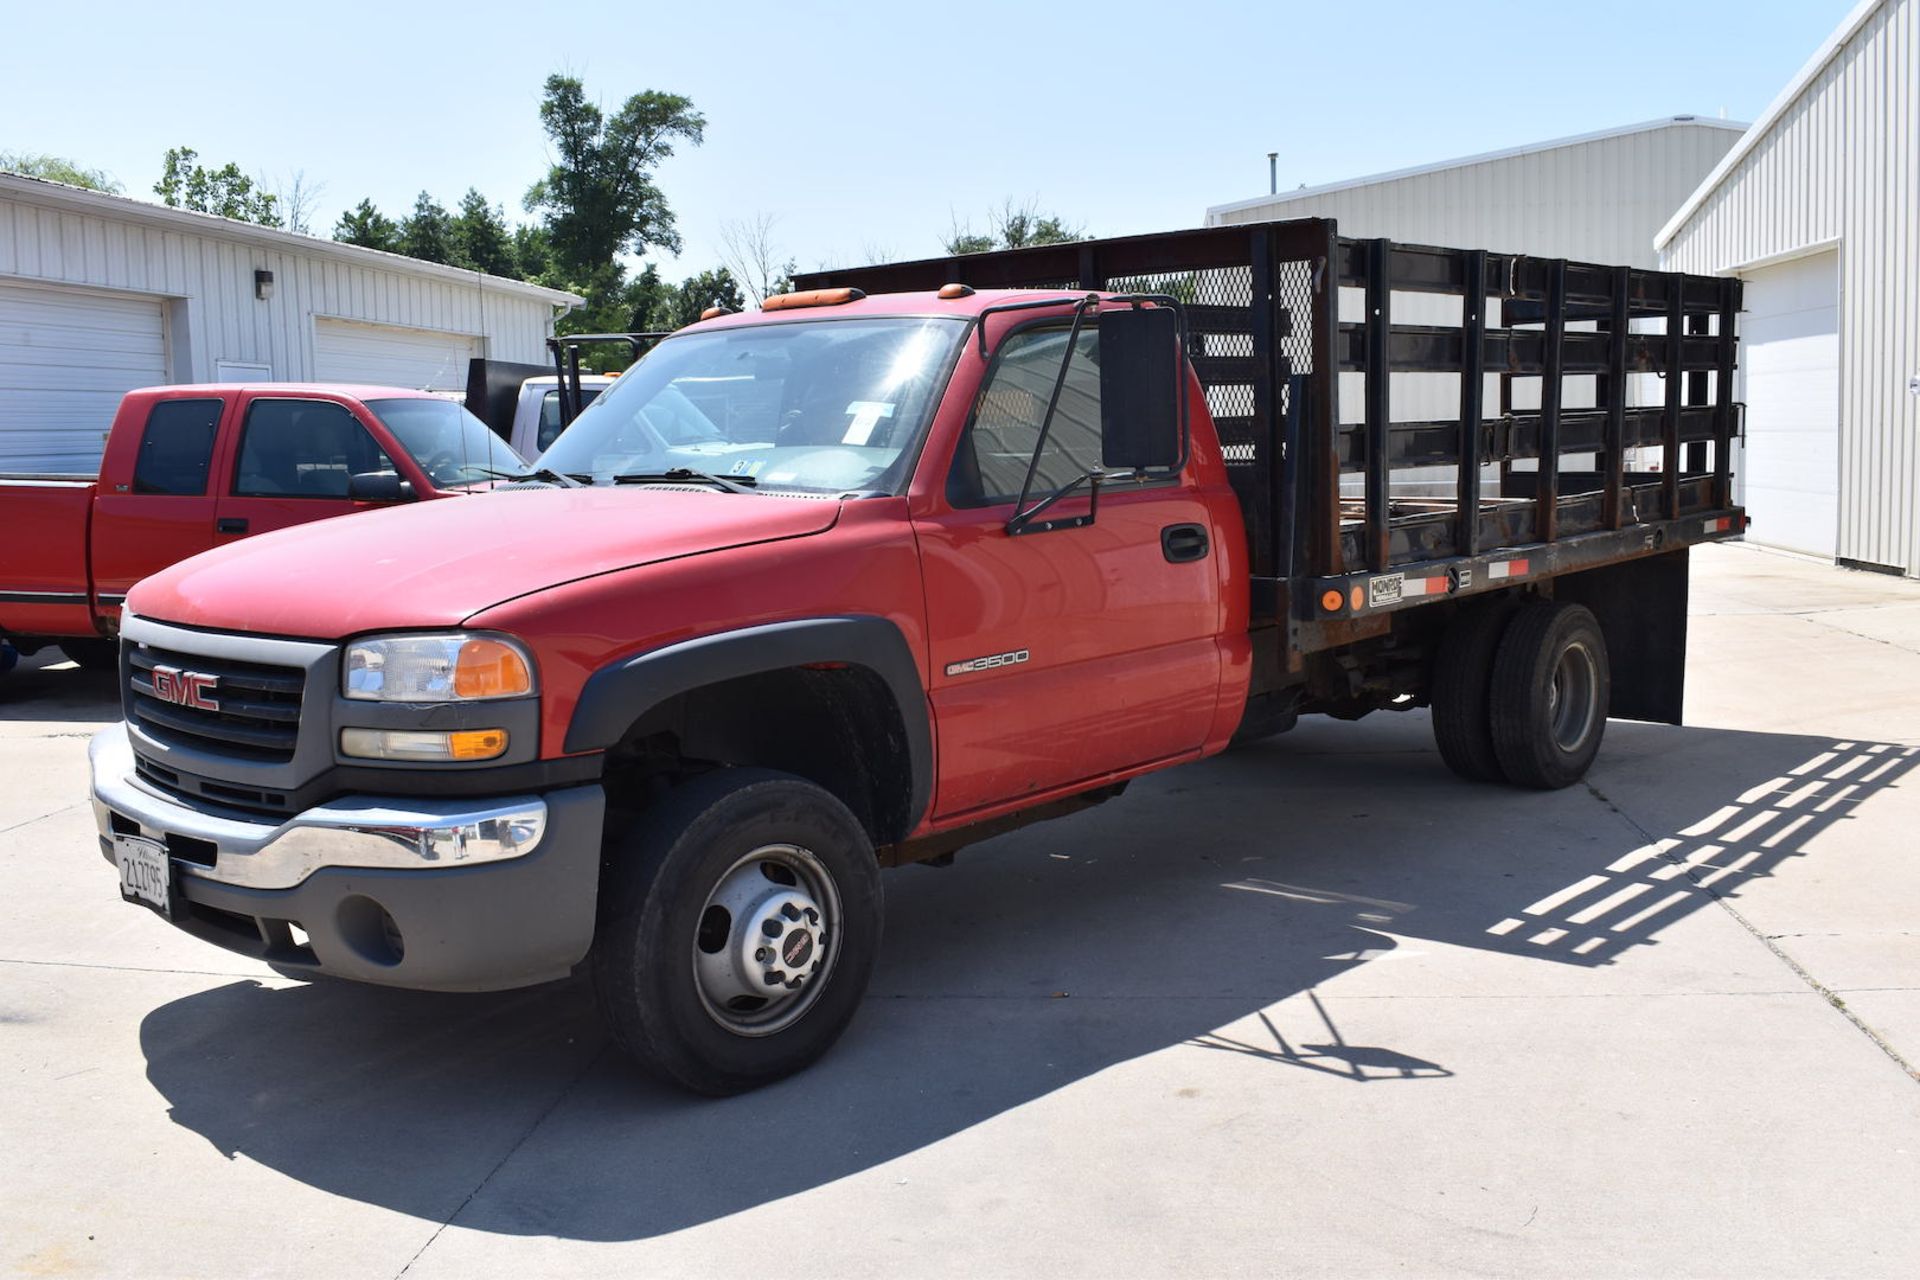 2005 GMC 3500 Single-Axle Stake Bed Truck, VIN 1GDJC34UX5E344645, 12 ft. (approx.) Bed, Vortec 6.